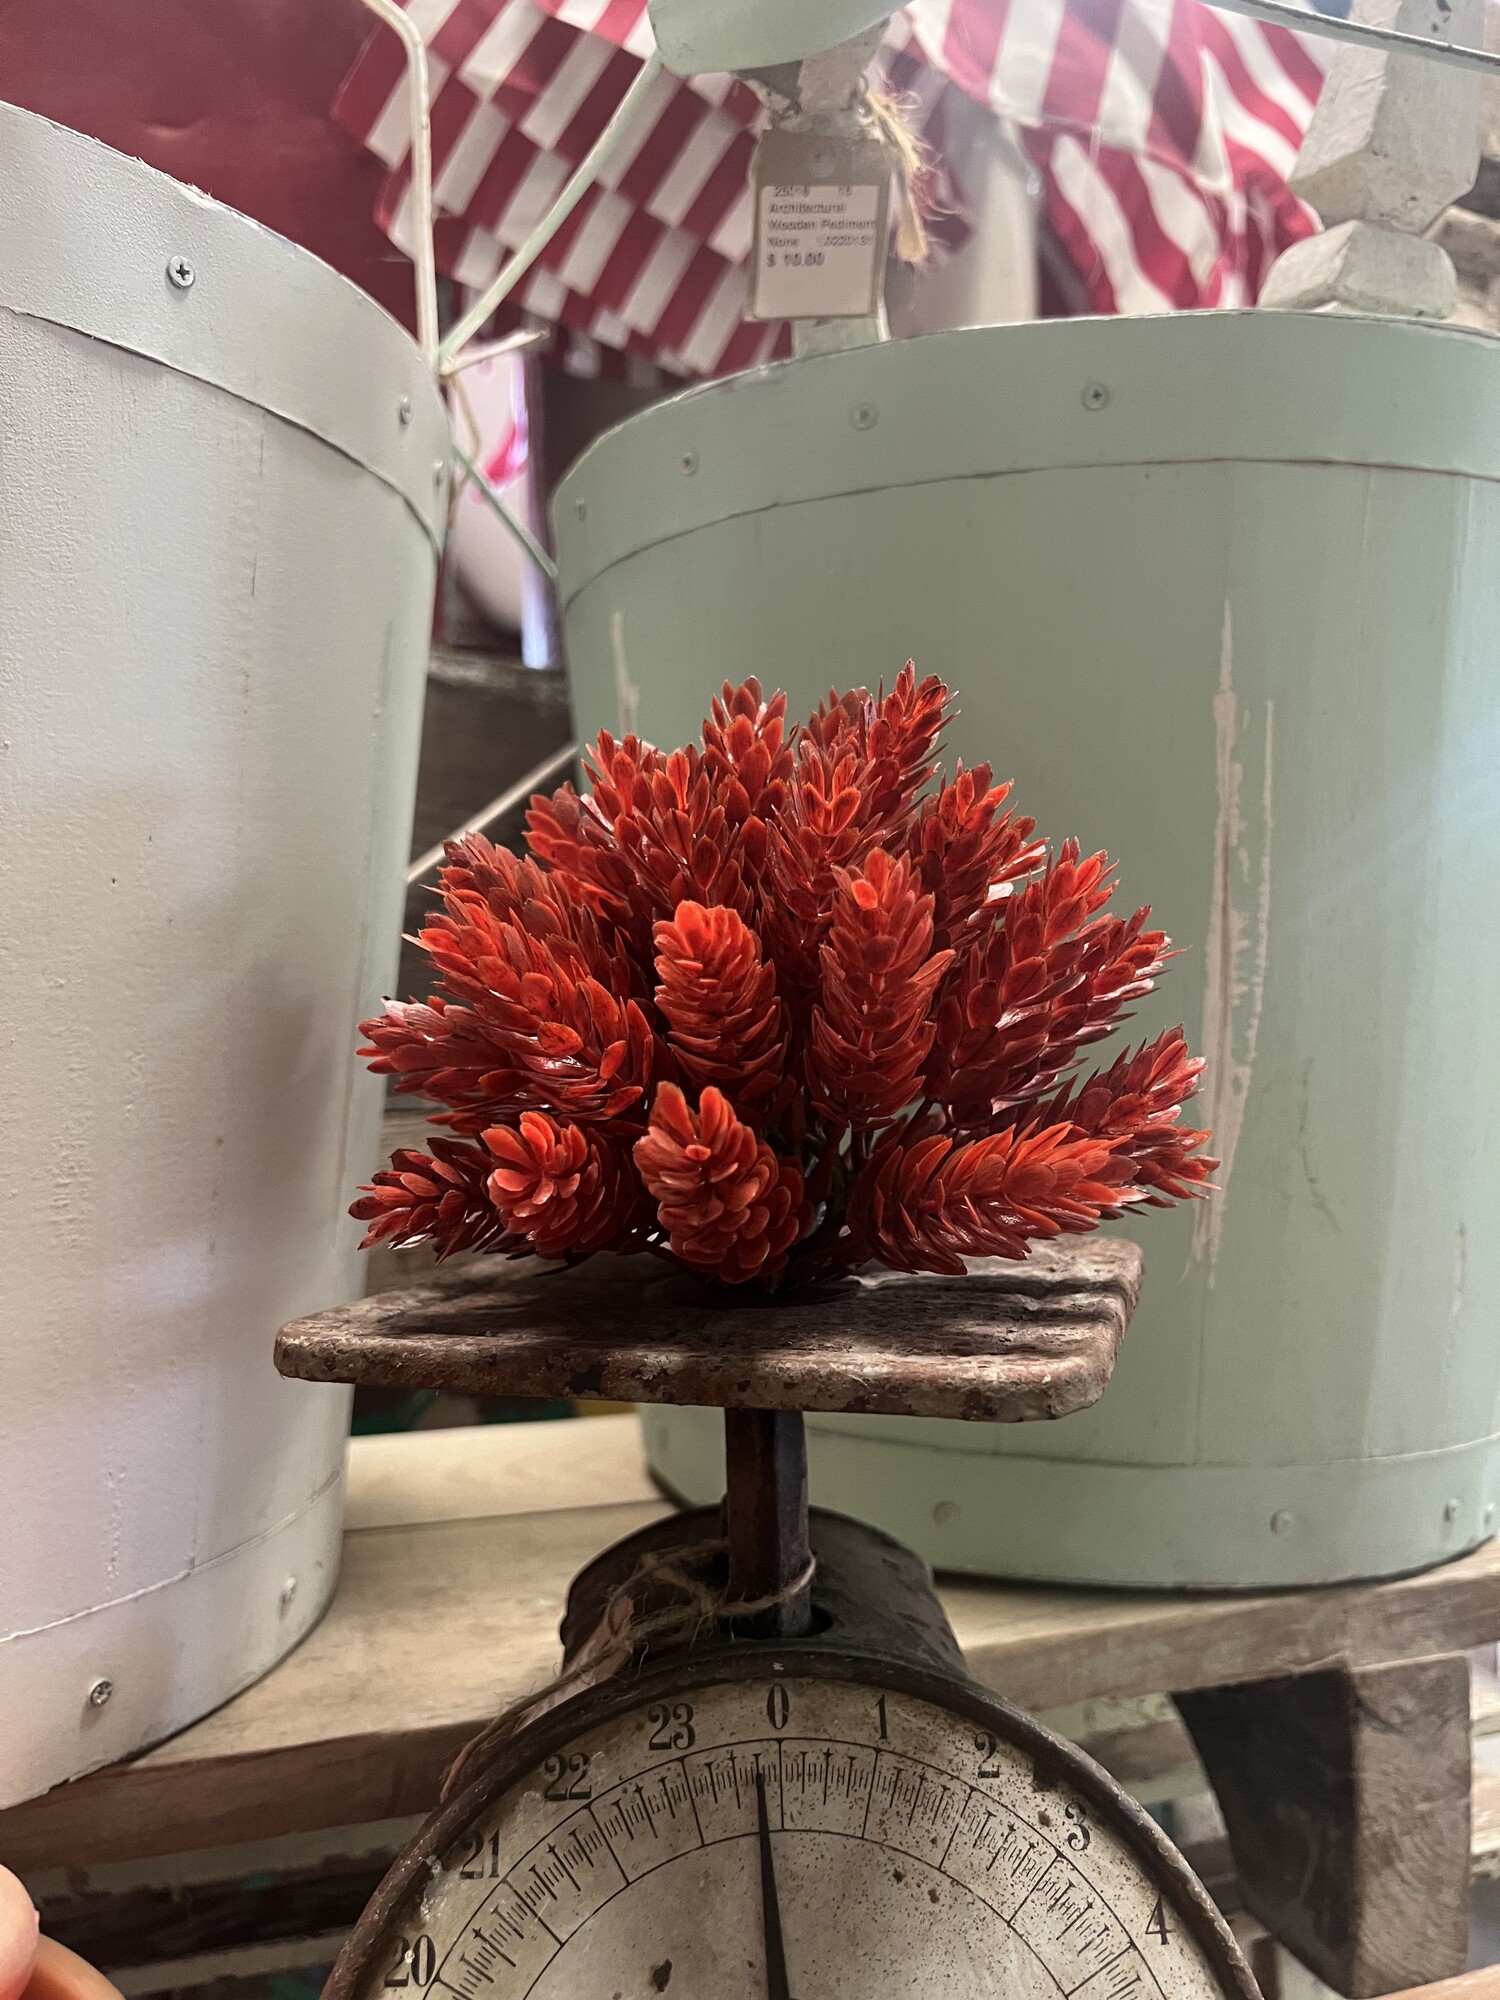 The Heartfelt Hops Half  Sphere is a decorative autumnal floral with a rich dark orange color.
The Hops have a sturdy, smooth texture and can be placed anywhere you want to add a touch of texture to your fall display.  Measures 7 inches in diameter